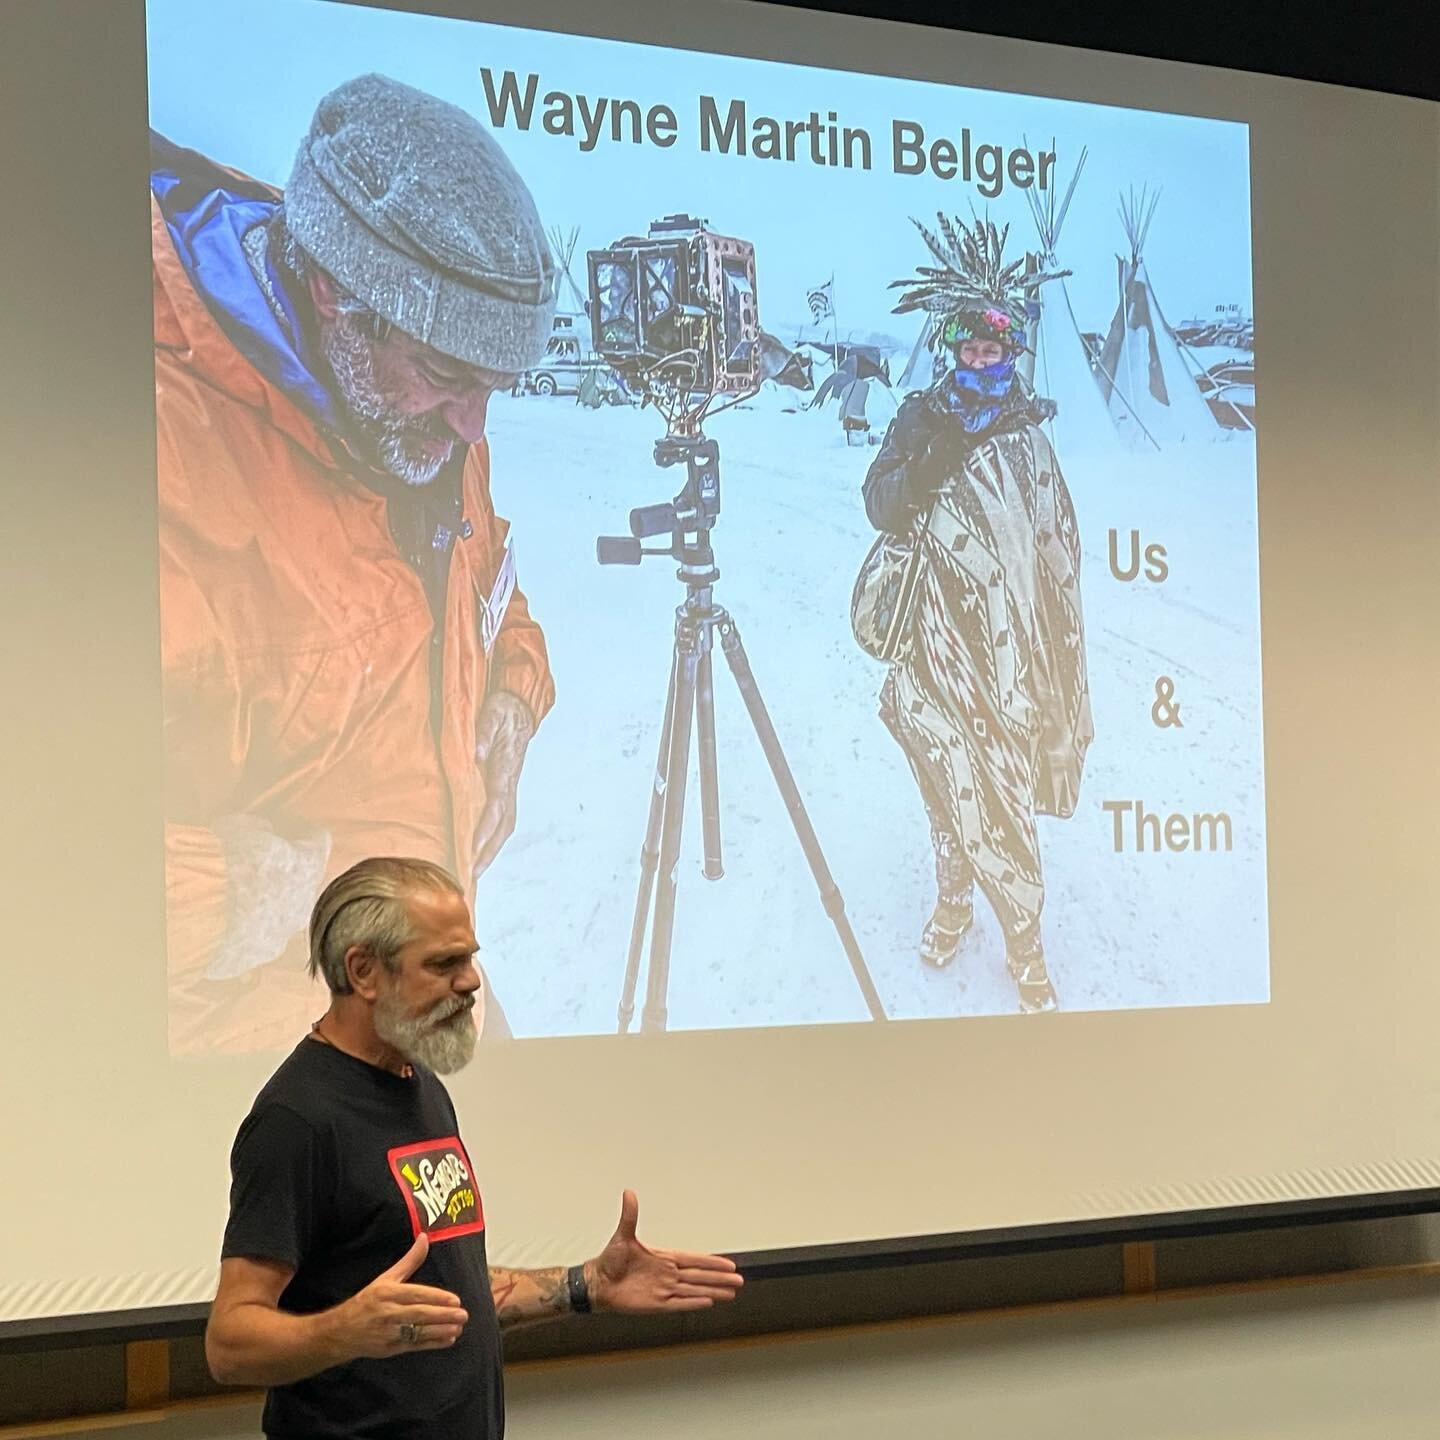 My Fine Print Workflow class at @rit.photo had the perfect pre-holiday weekend impromptu guest lecturer in my class today. 

A very contrasting lecture to the discussion of the digital workflow course was provided by @waynemartinbelger about his pinh